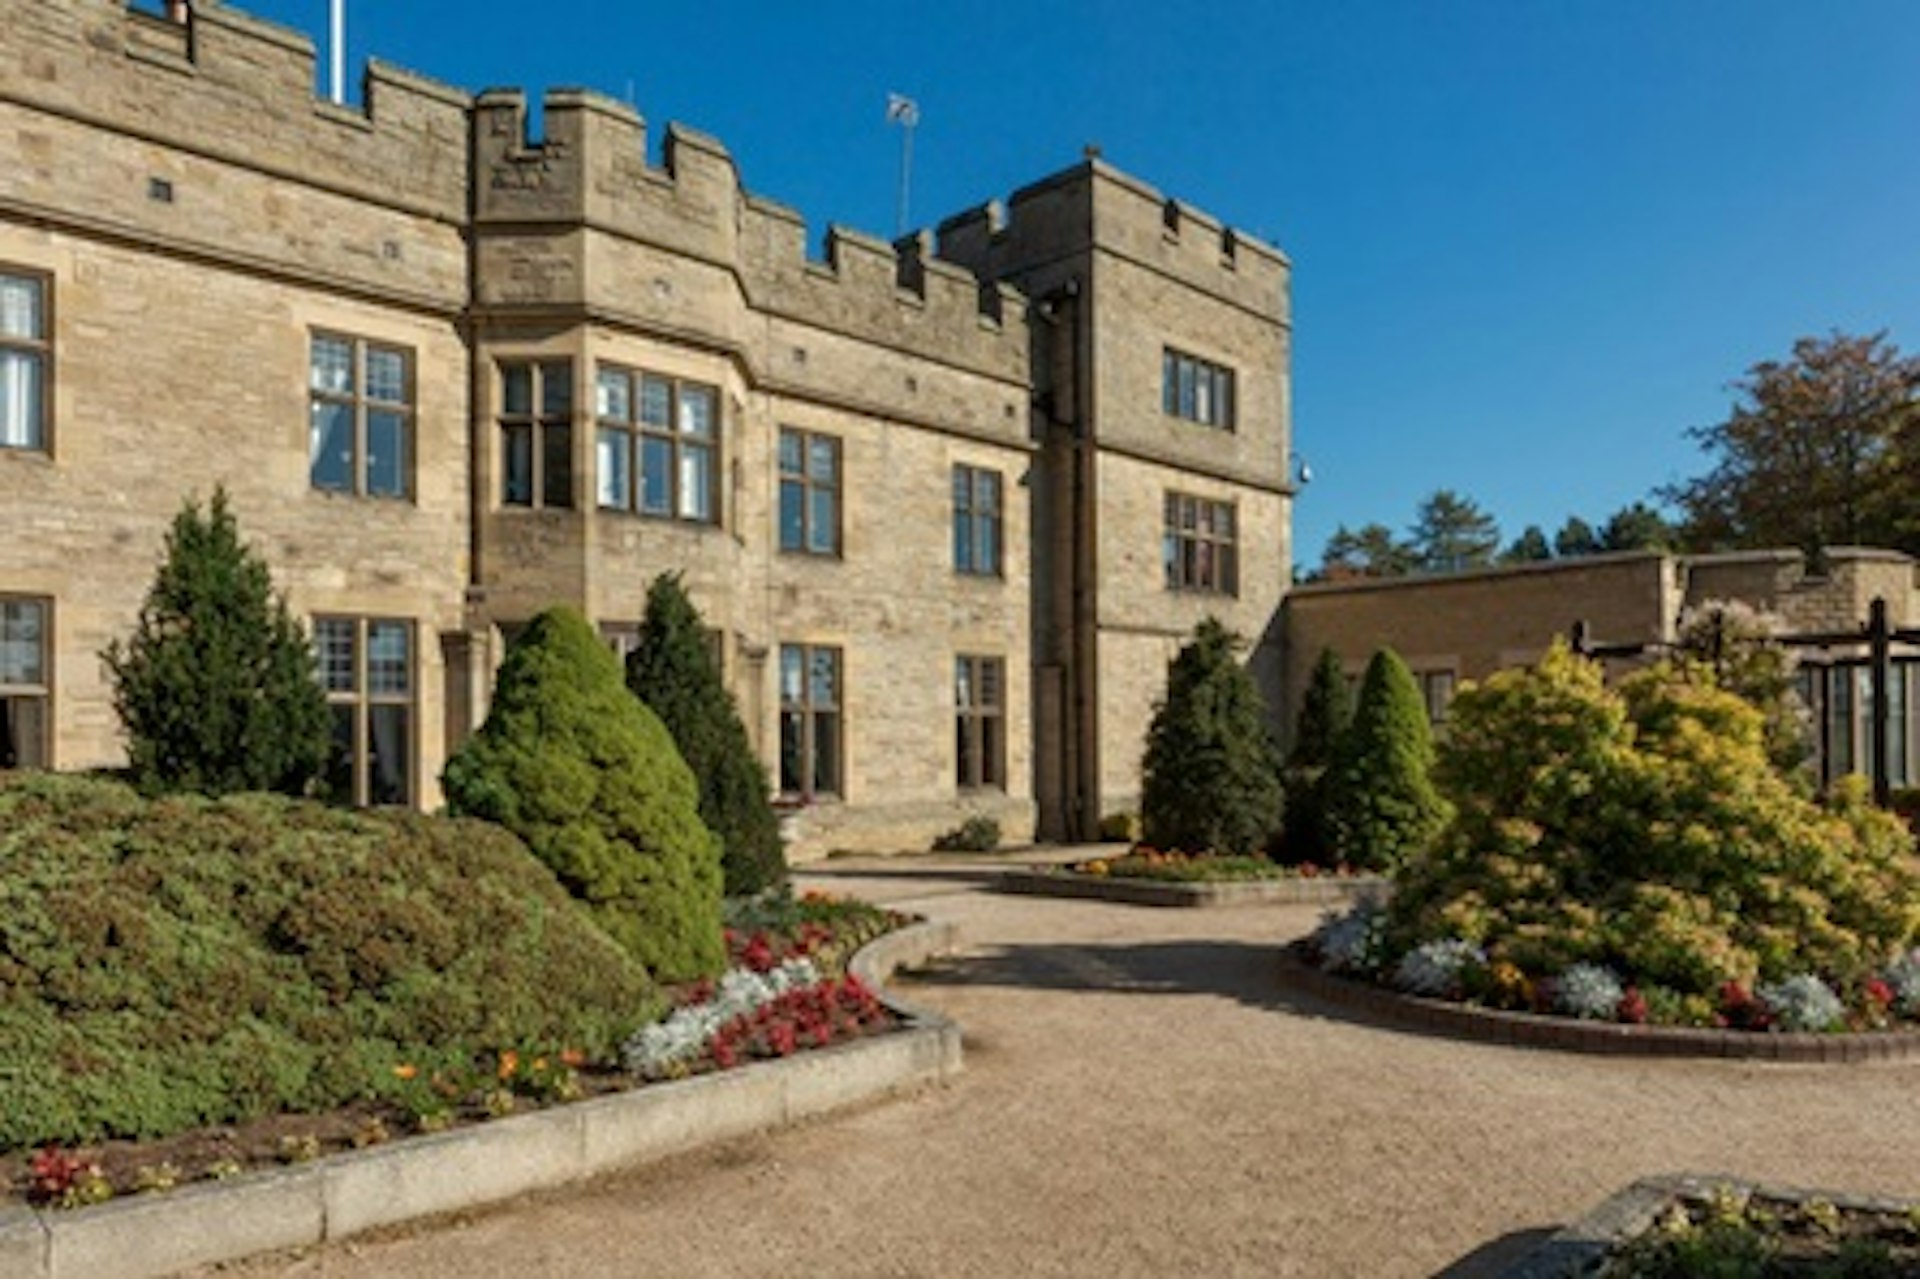 Weekend Ultimate Spa Day with Treatments, Lunch and Fizz at the 4* Slaley Hall Hotel 4